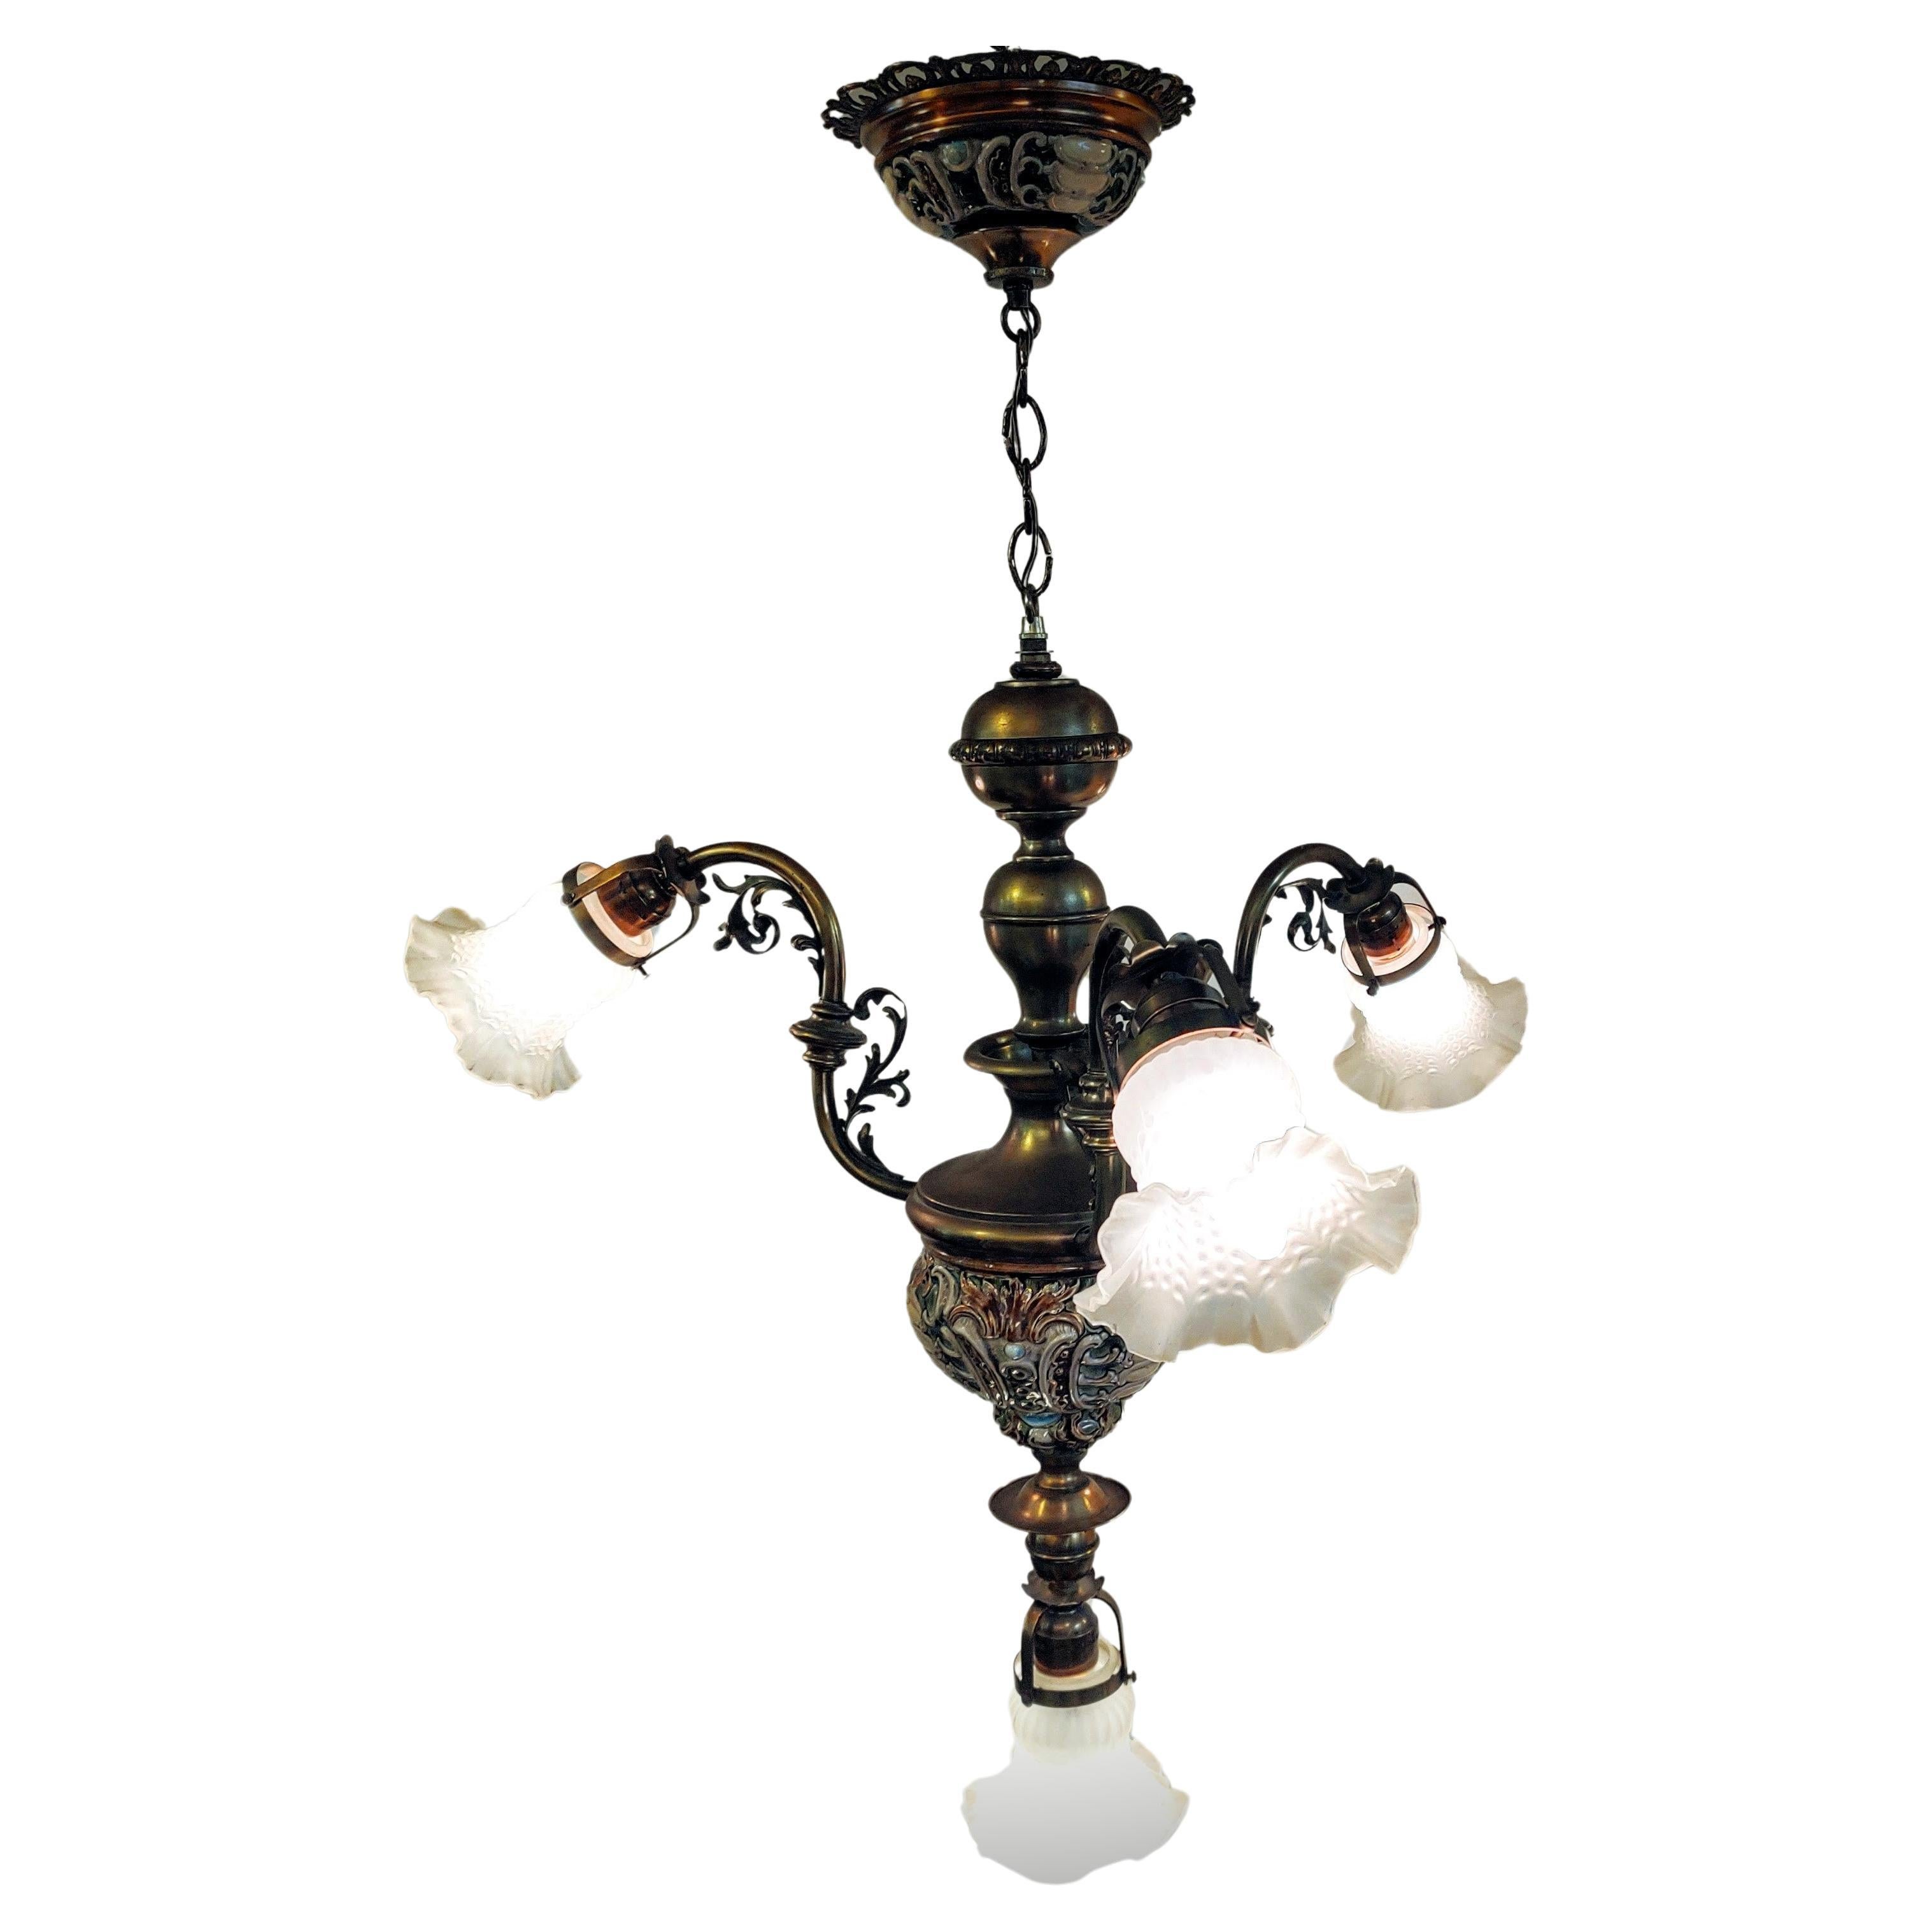 Stunning Italian Maiolica Ceramic and Brass Ceiling Lamp with four glass shades For Sale